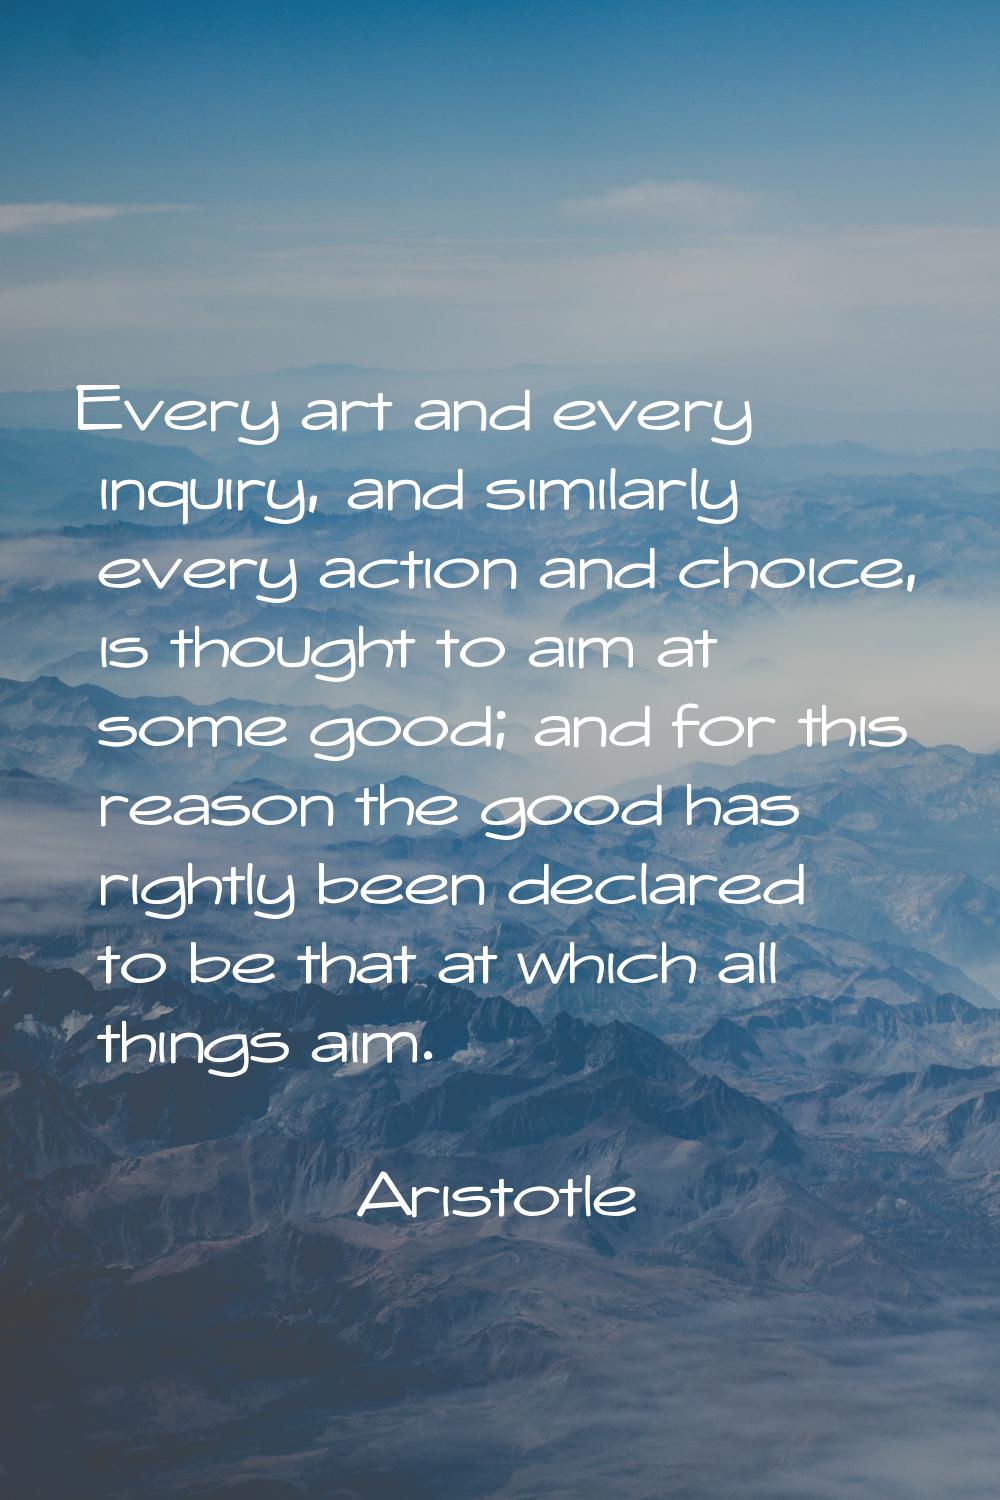 Every art and every inquiry, and similarly every action and choice, is thought to aim at some good;